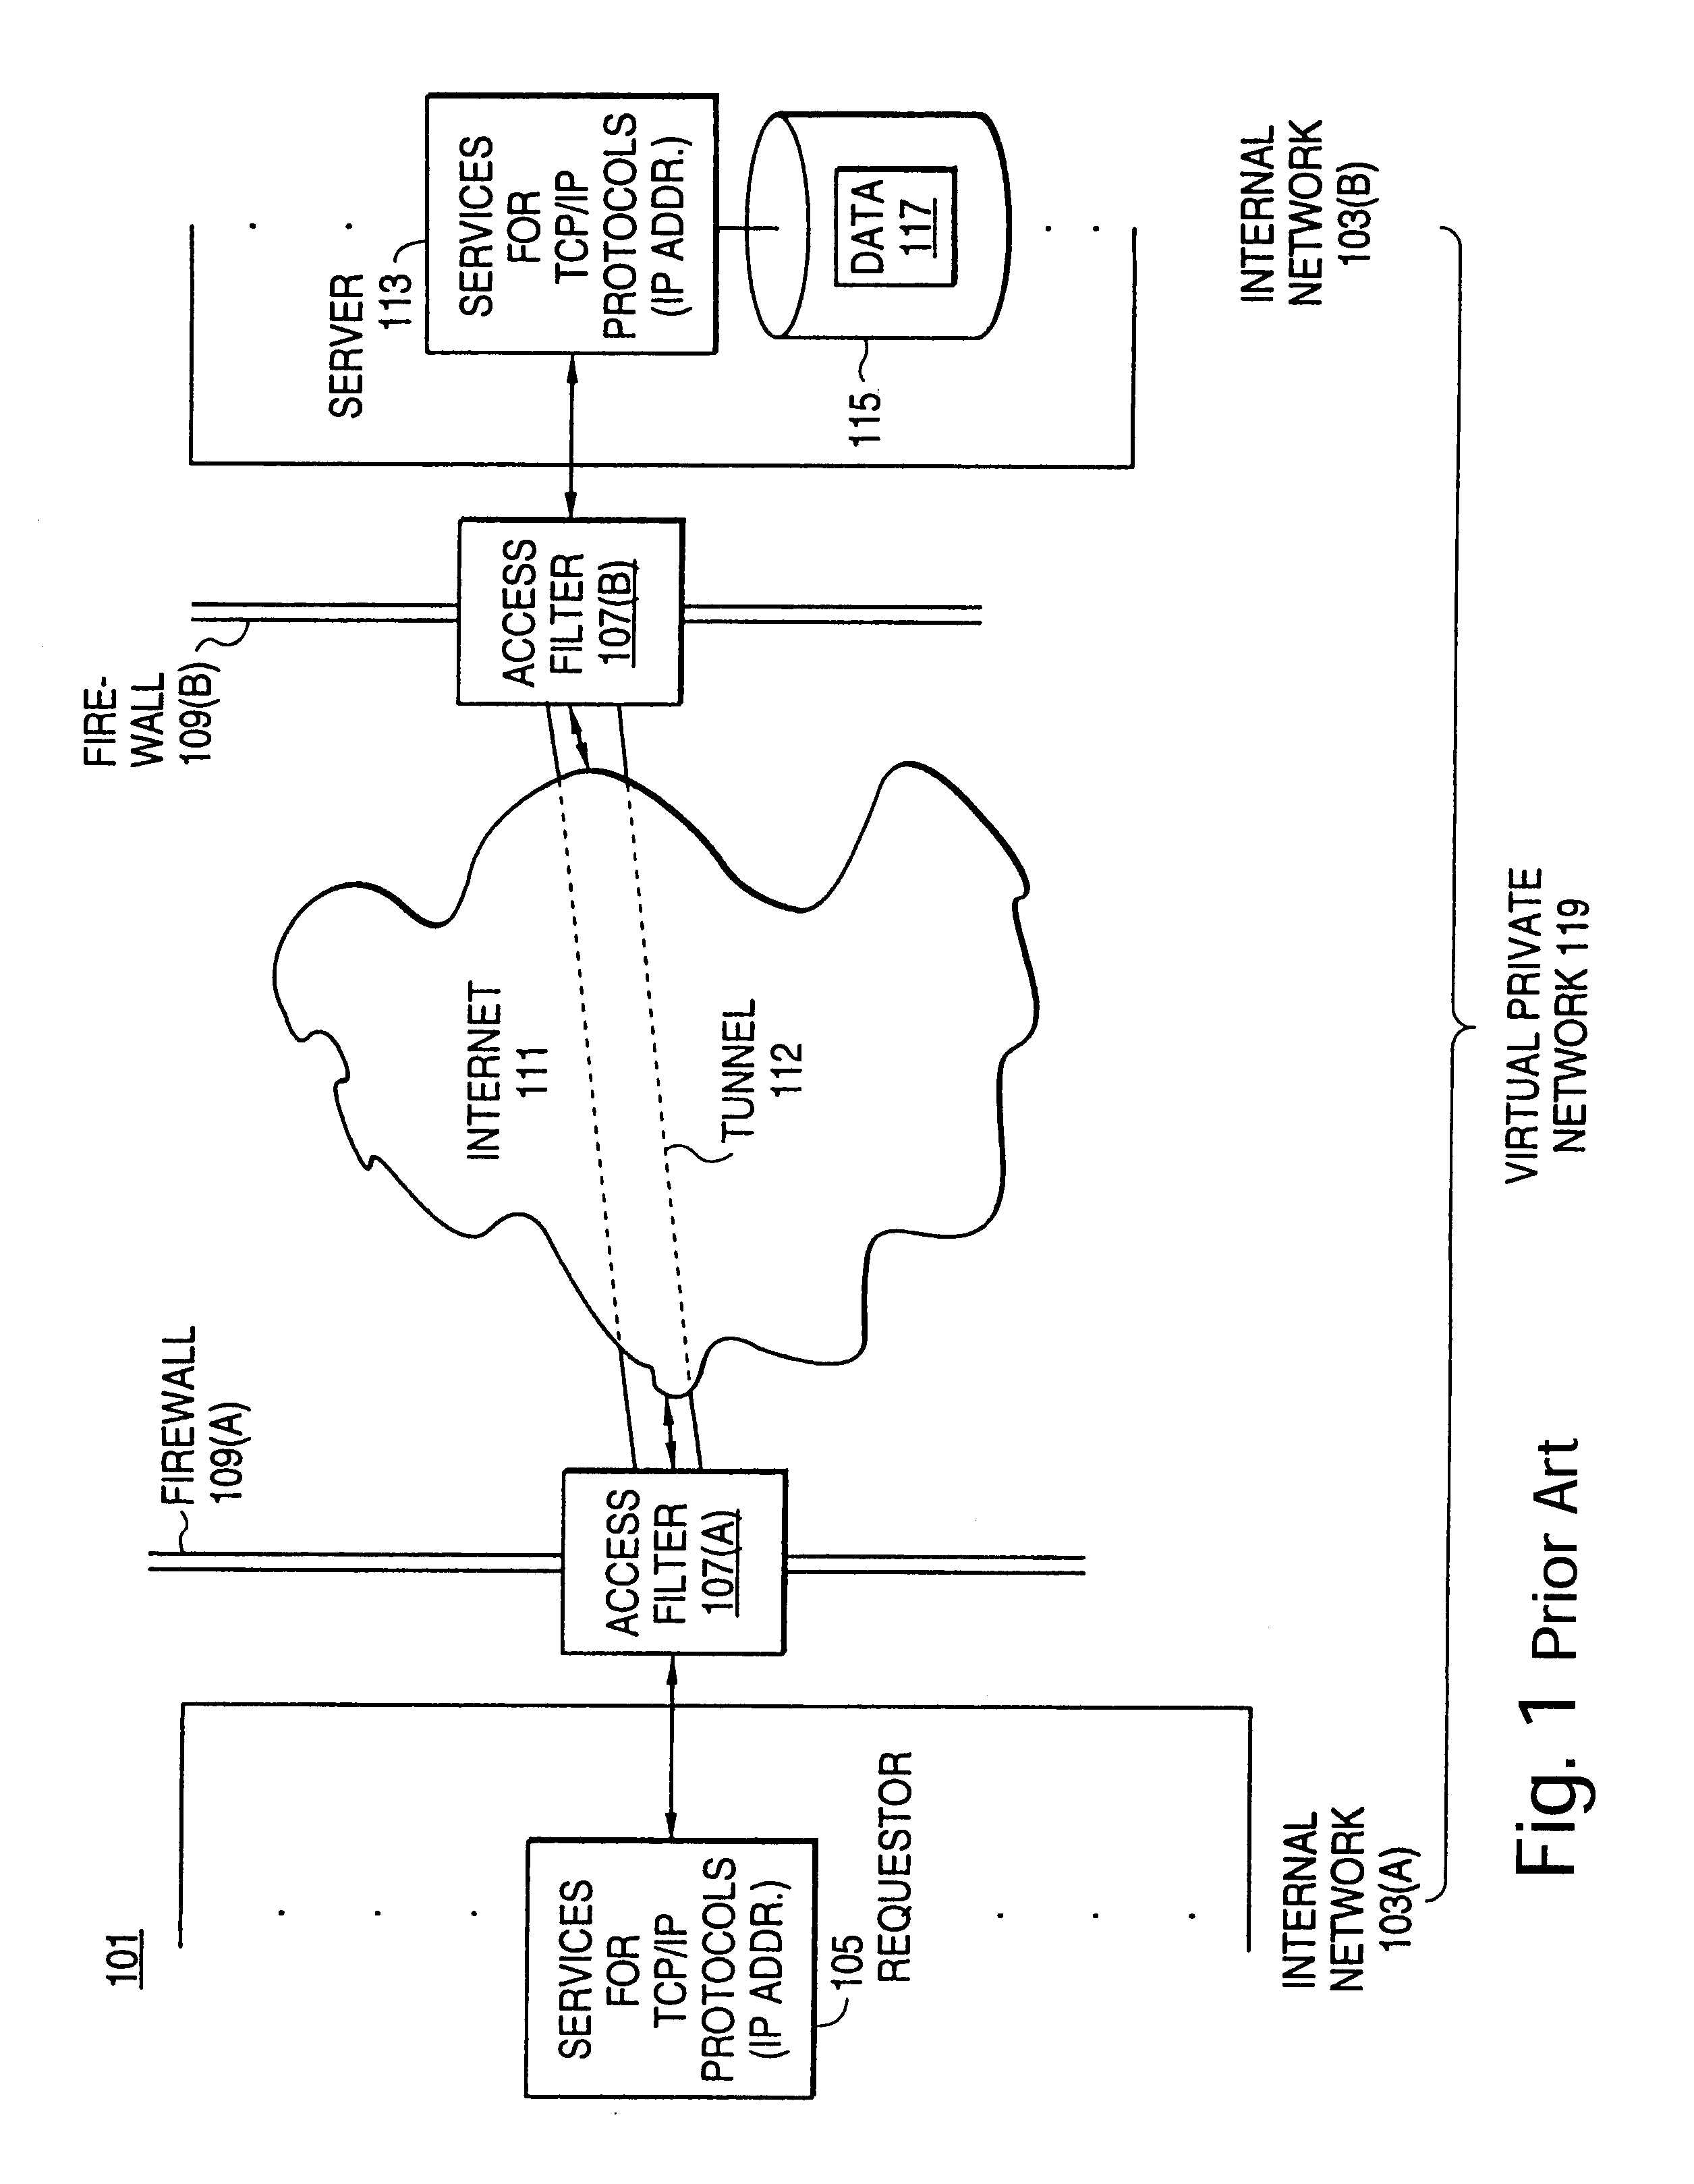 Distributed administration of access to information